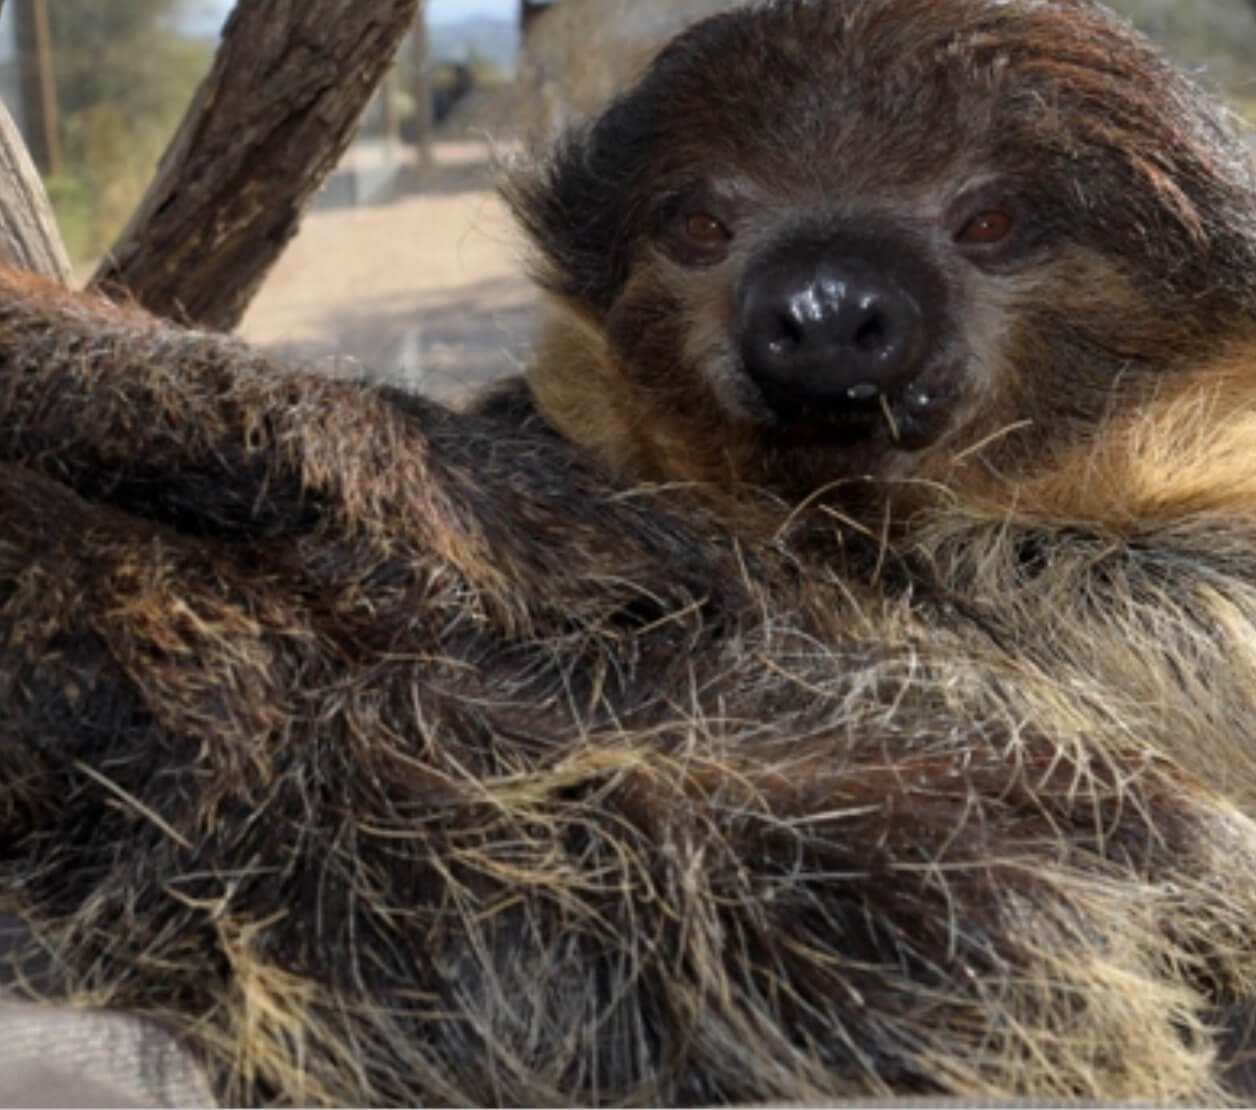 Bart the Sloth looks directly into the camera, waiting for you to visit him!